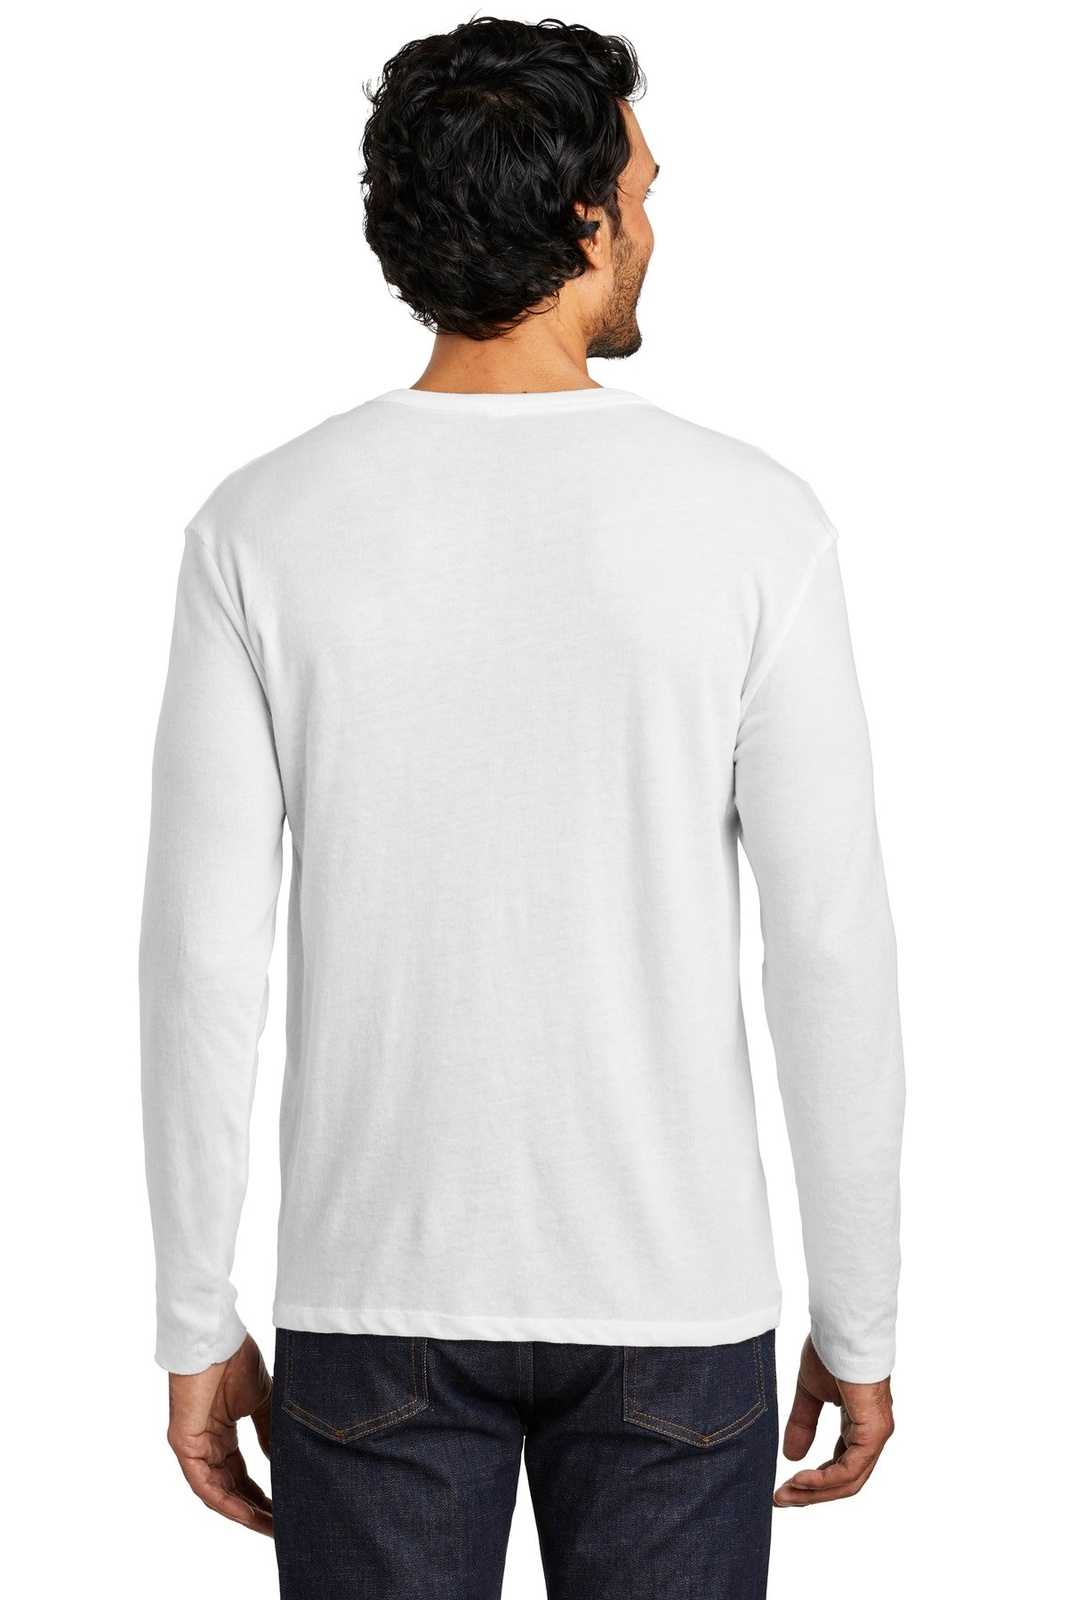 Alternative AA5100 The Keeper Vintage 50/50 Long Sleeve Tee - White - HIT a Double - 1